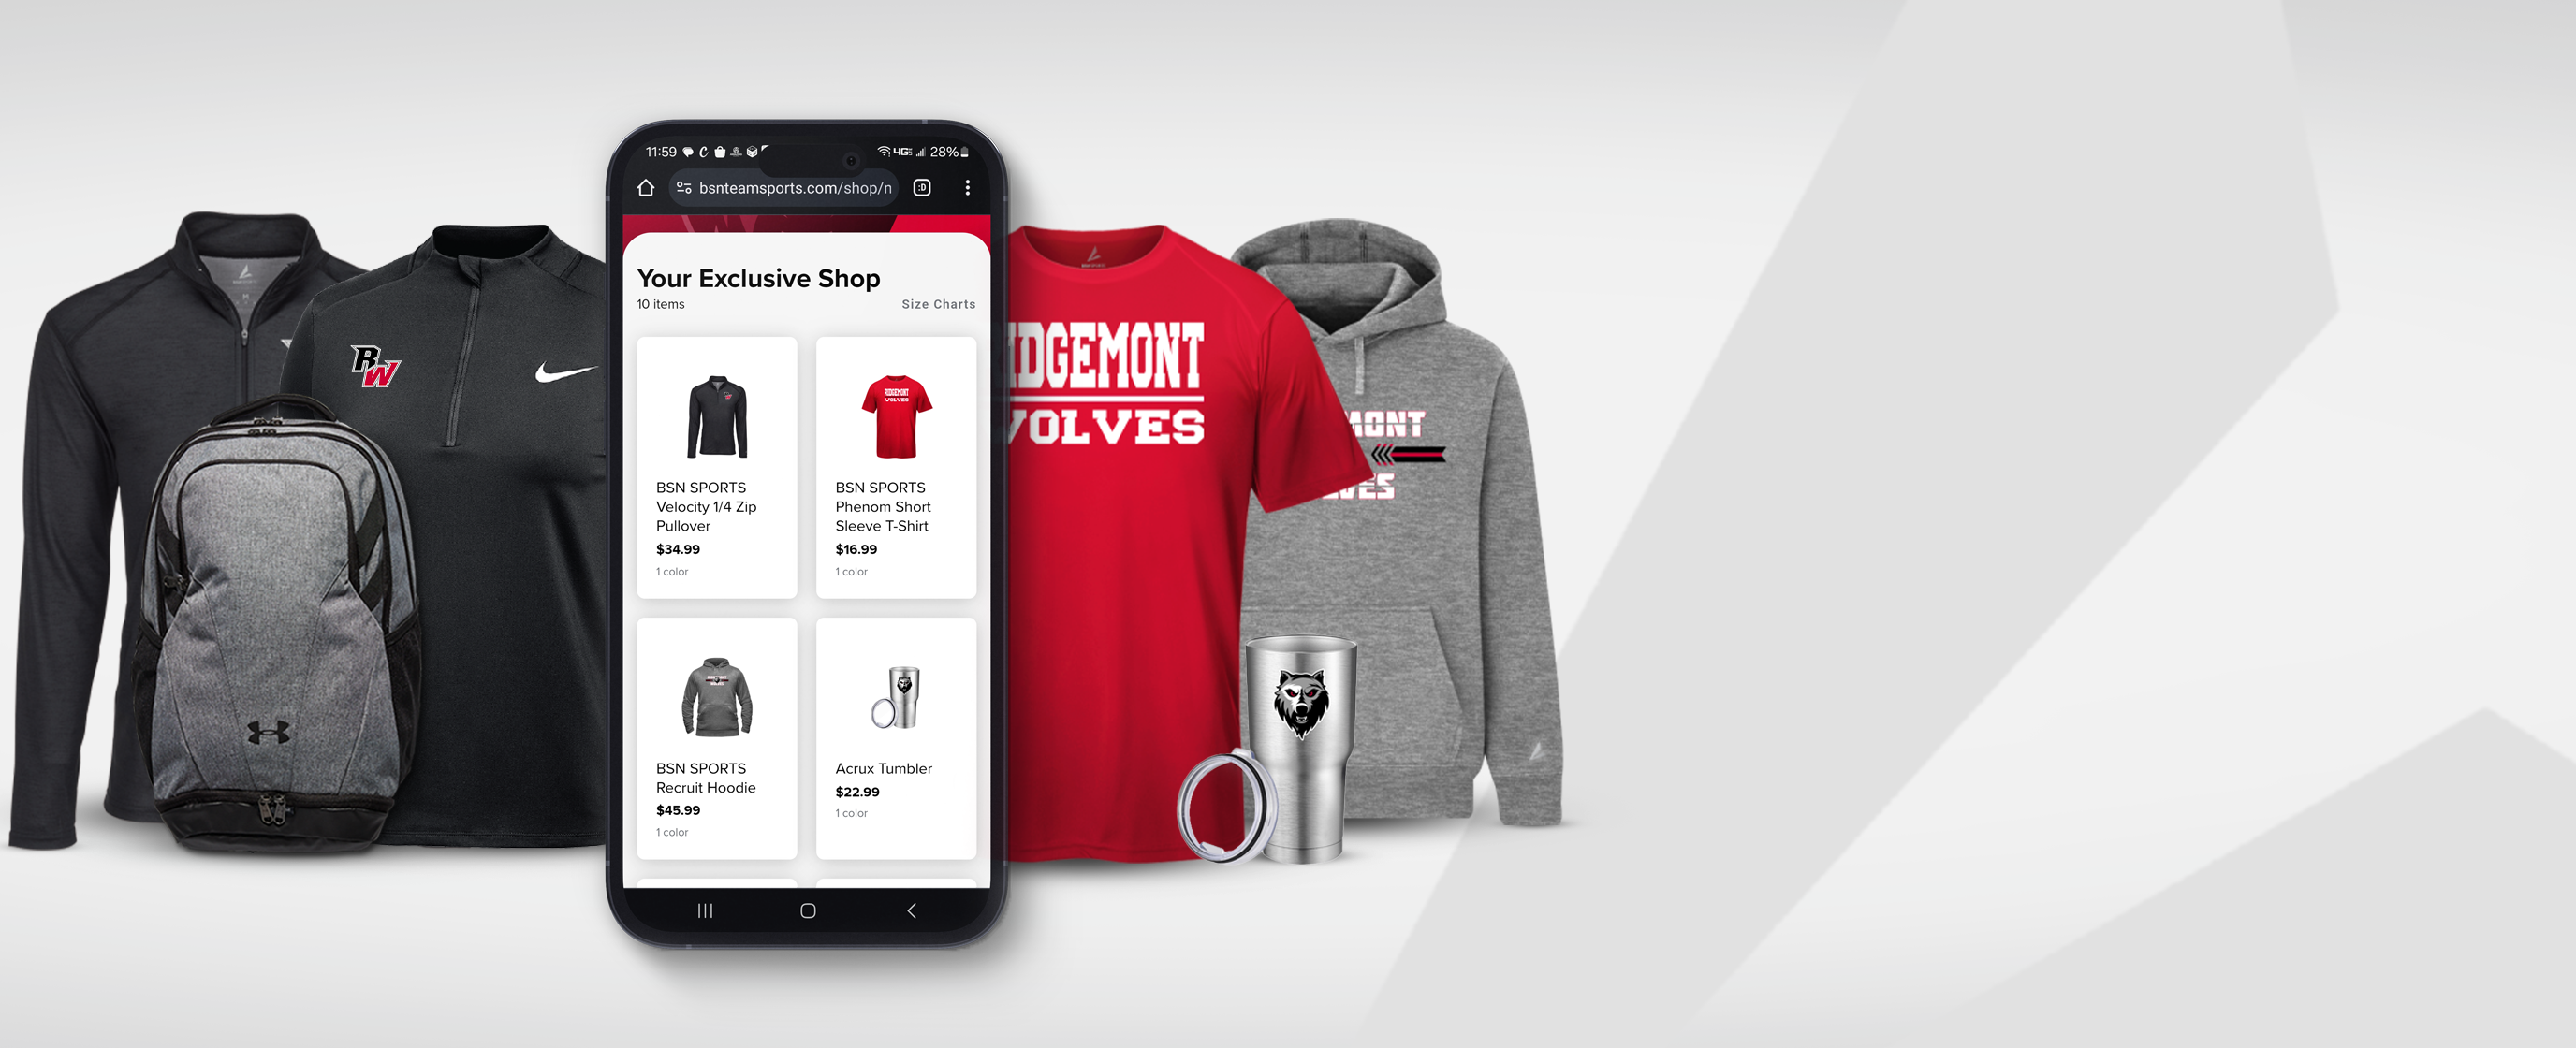 Hero image showing the My Team Shop platform on an iPhone as well as customized team gear featured on a My Team Shop